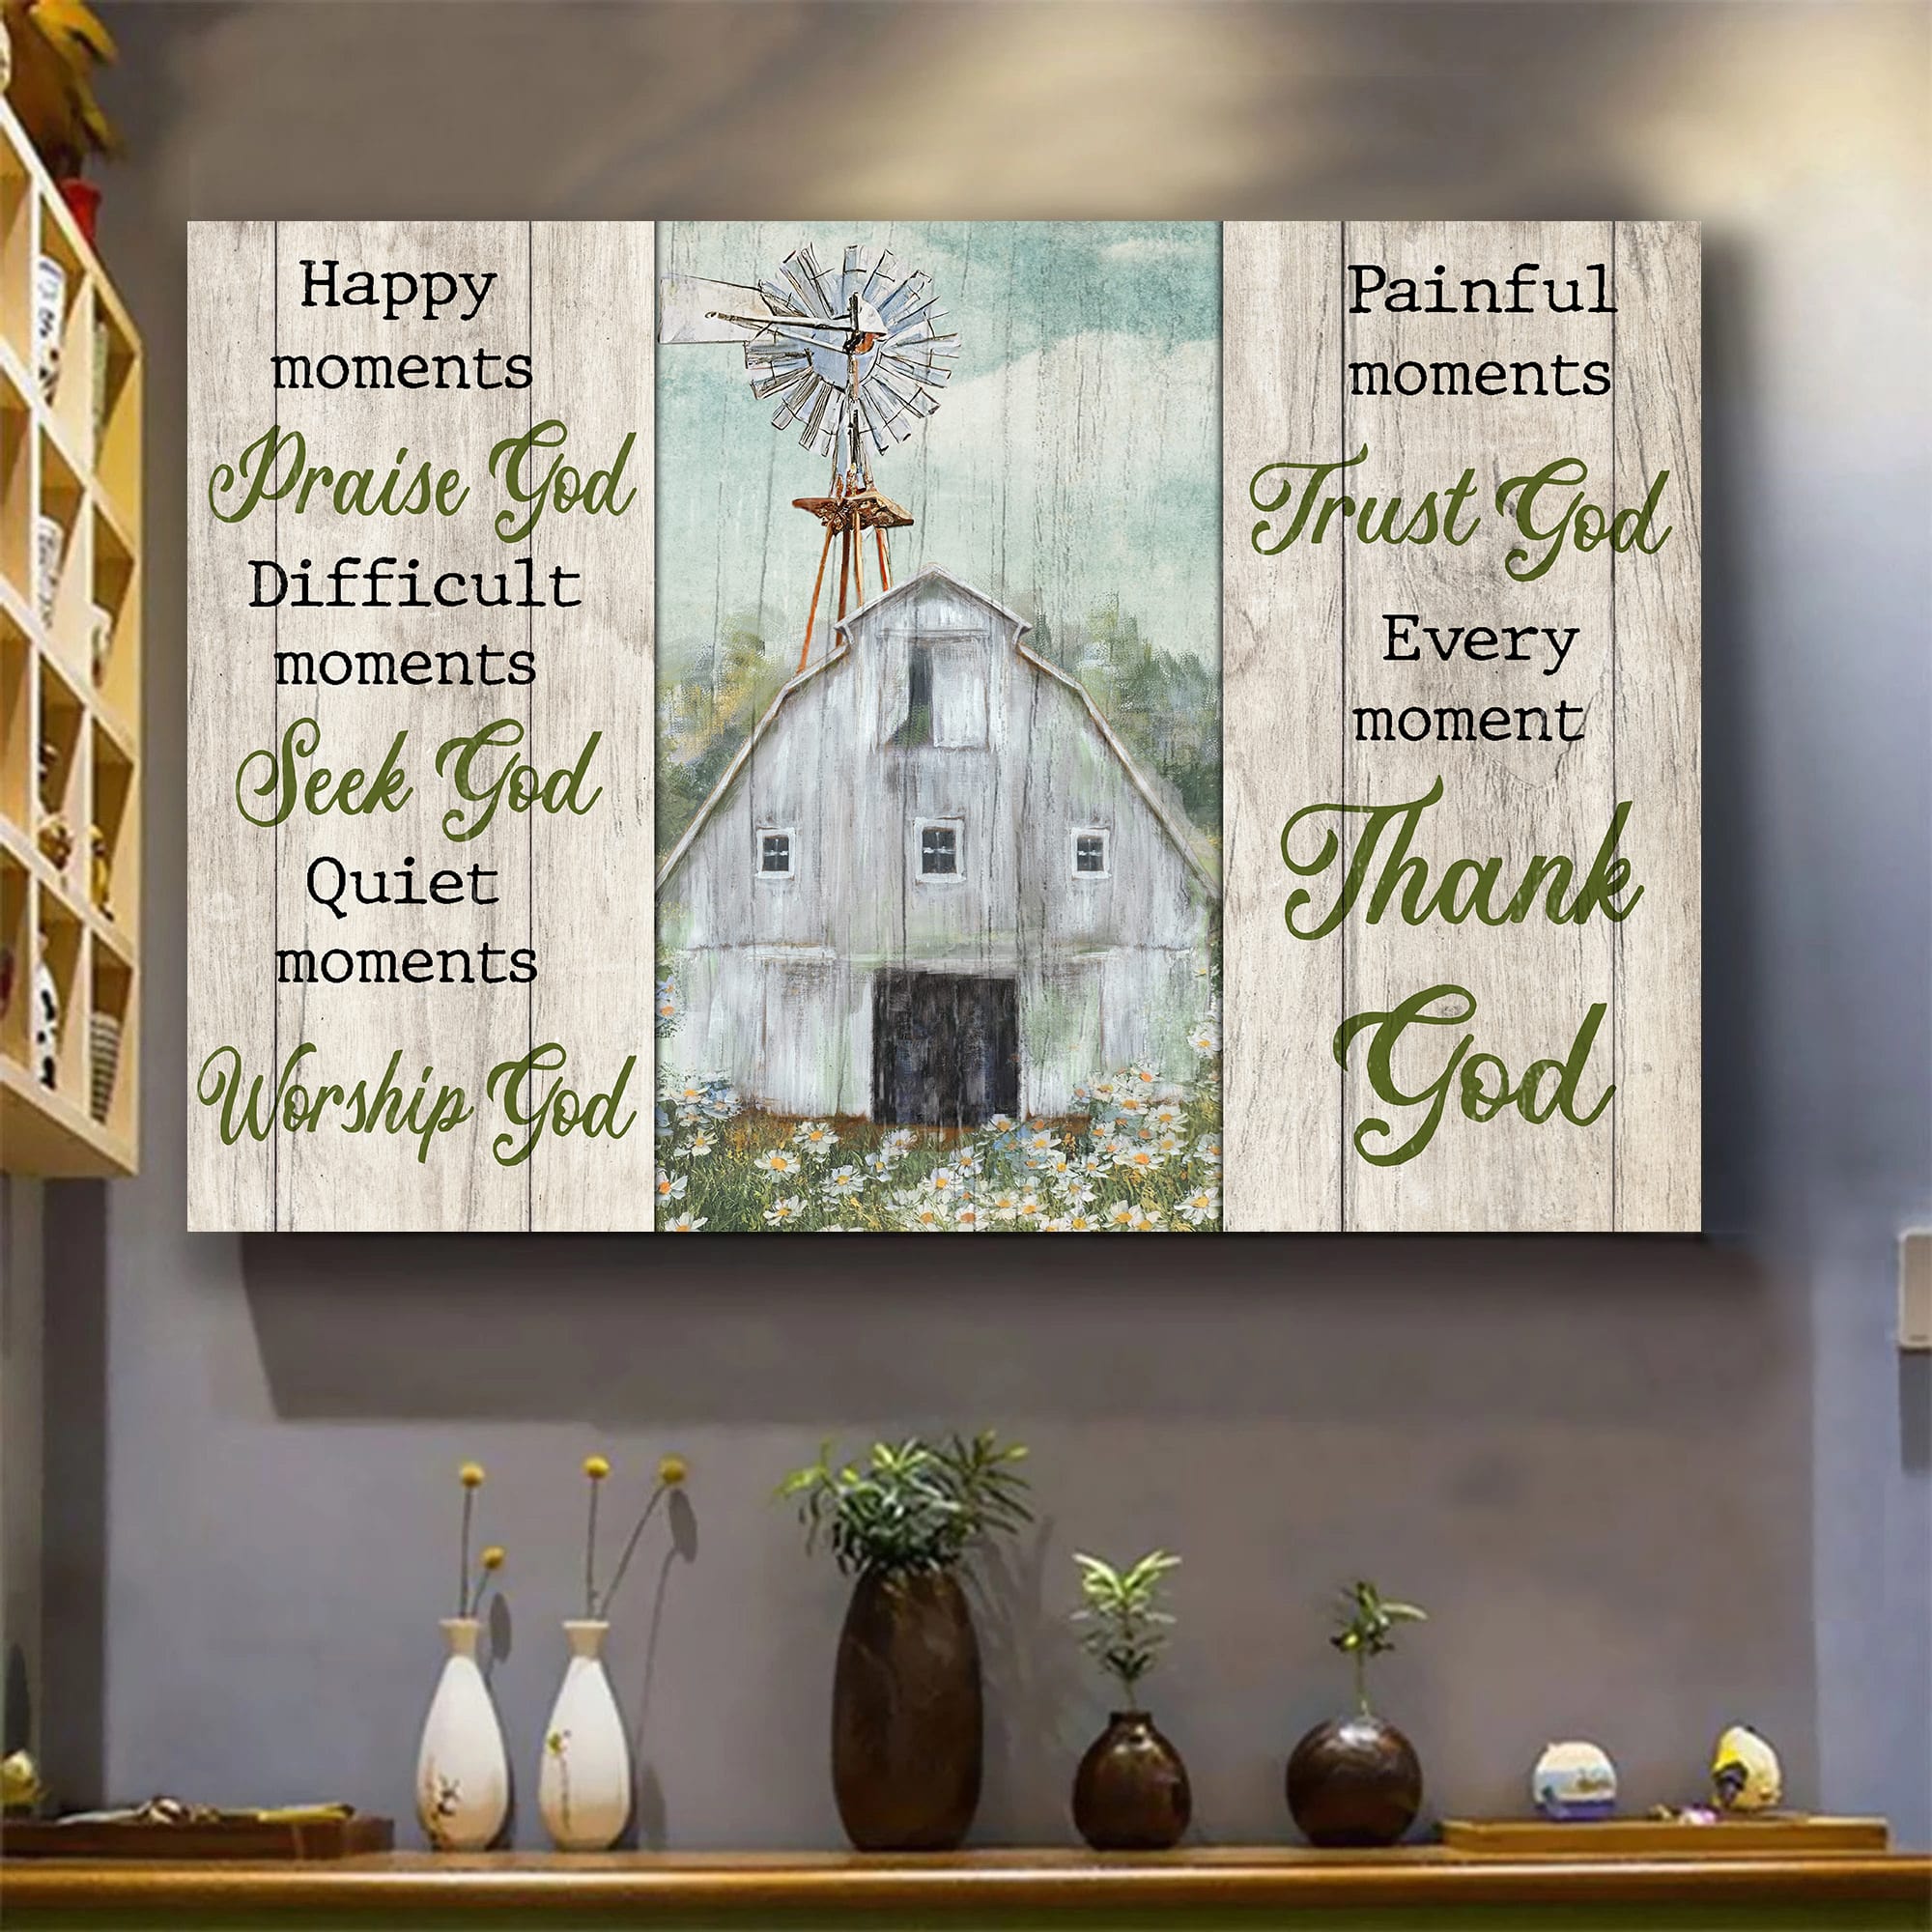 Old Barn Painting, Flower Field, Every moment Thank God - Jesus Landscape Canvas Prints, Wall Art